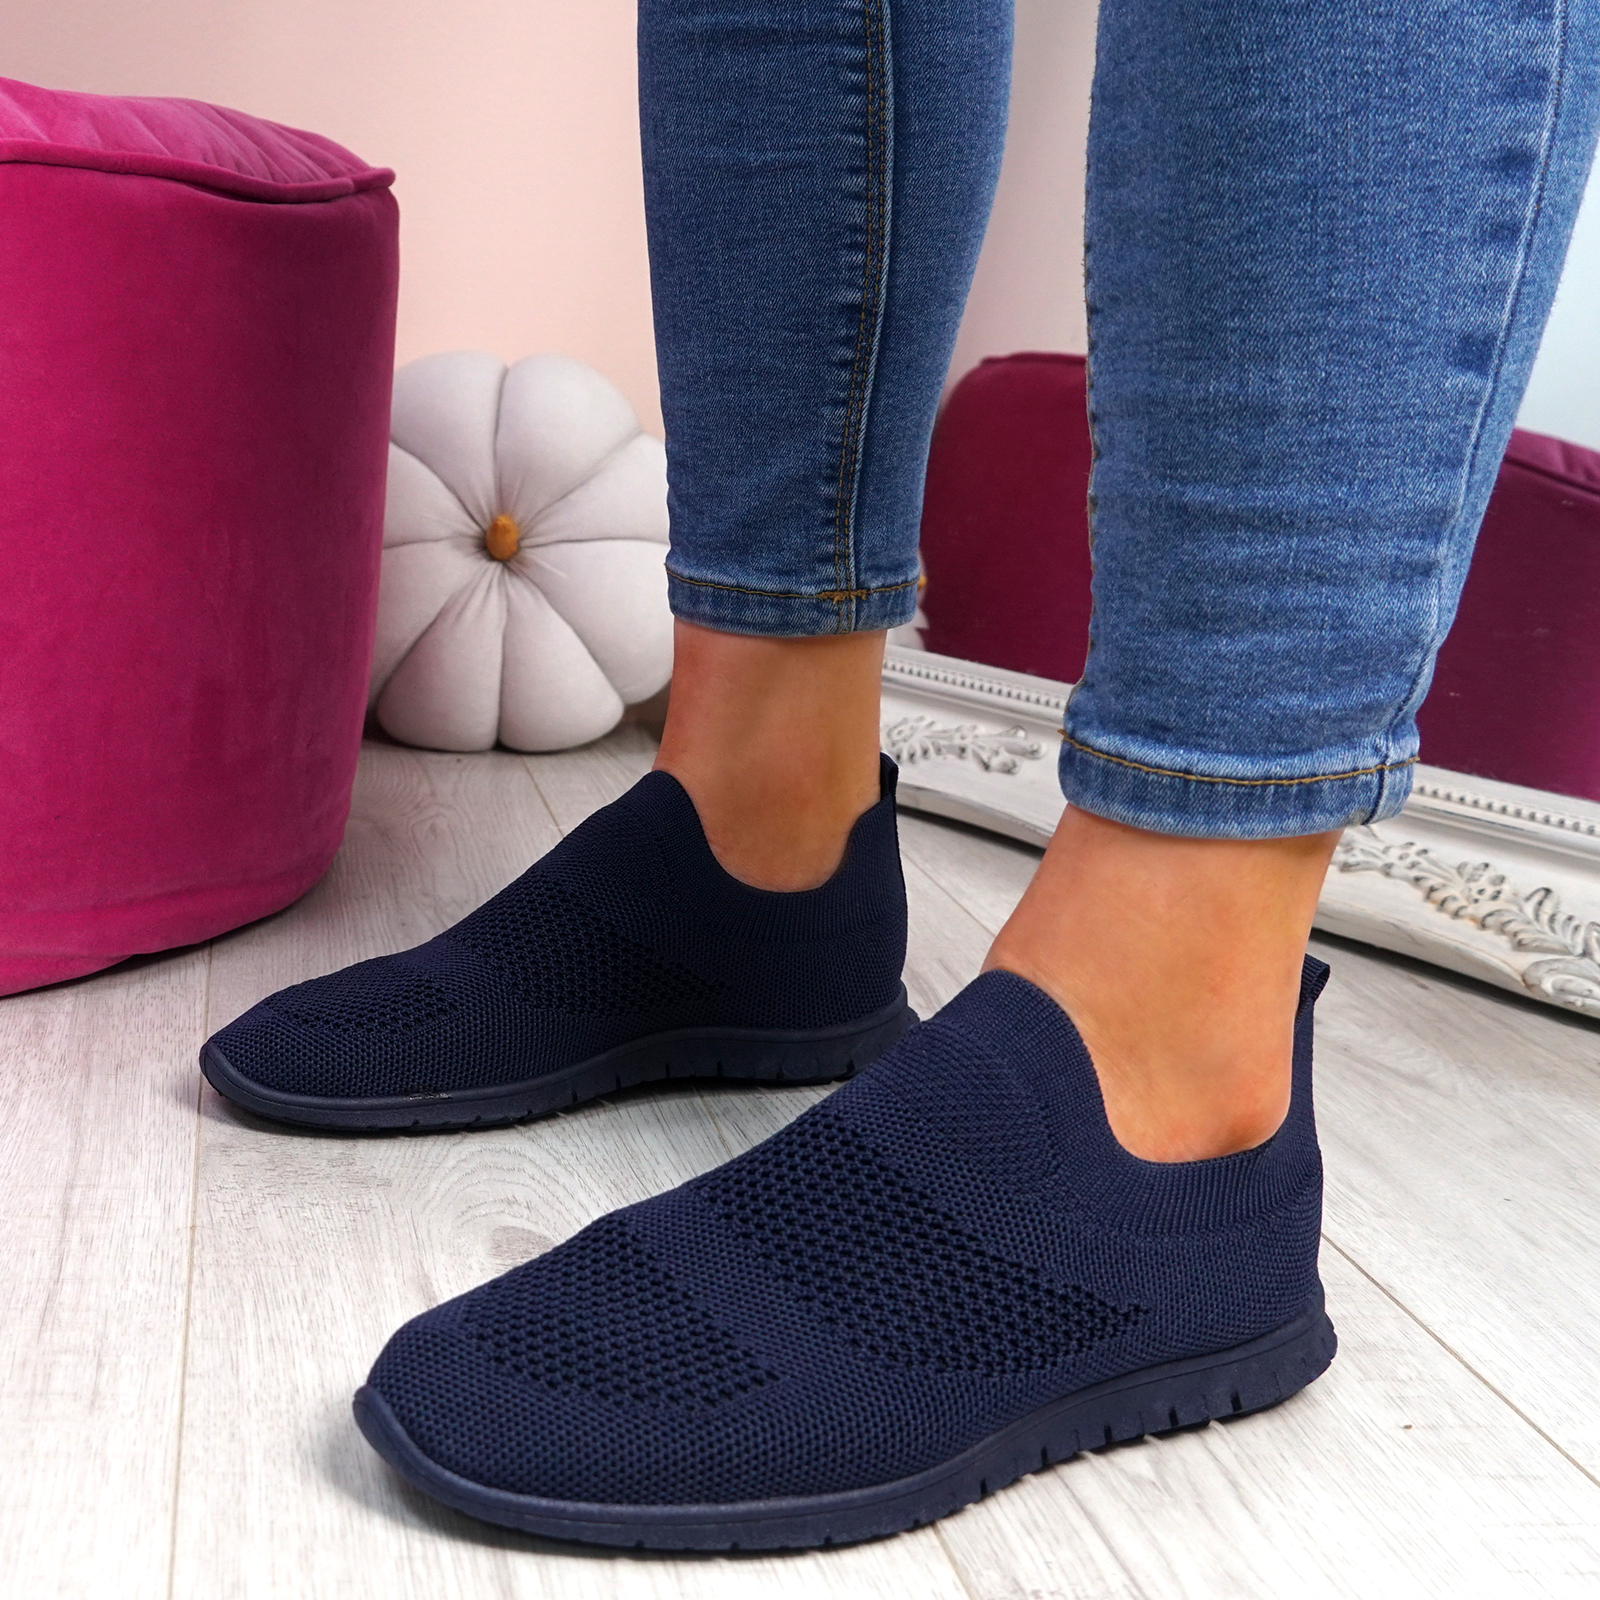 WOMENS LADIES SLIP ON KNIT TRAINERS RUNNING GYM SNEAKERS SPORTS WOMEN ...